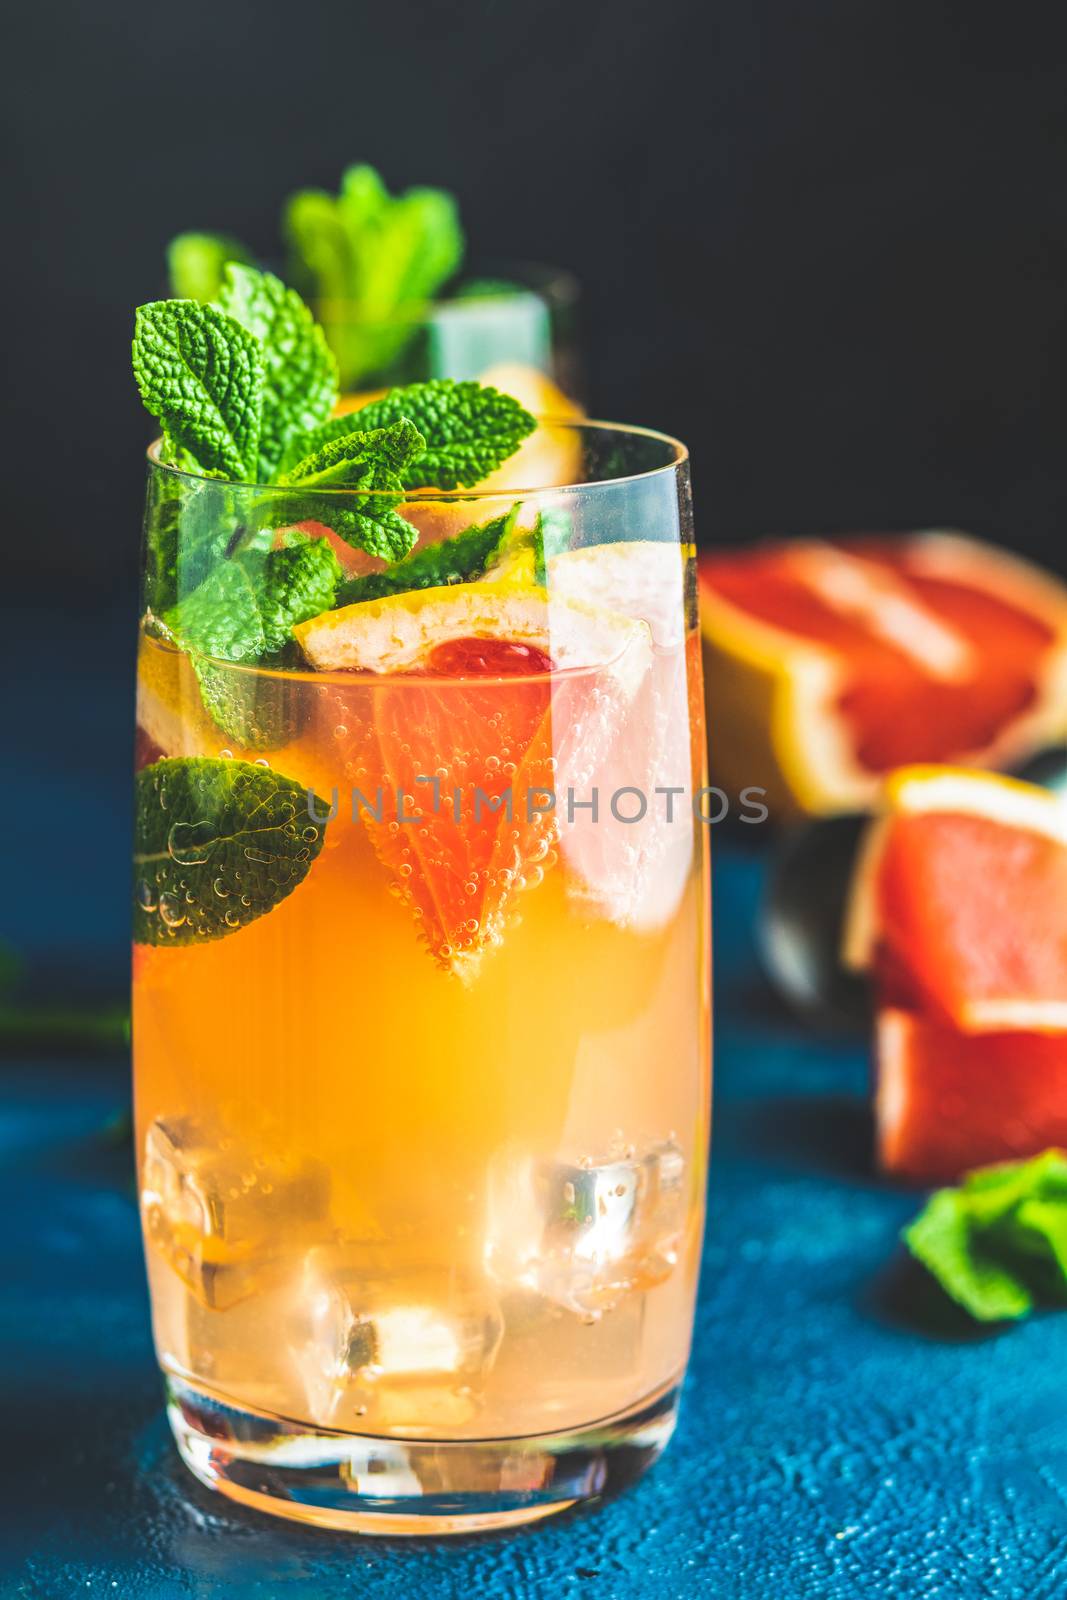 Grapefruit and mint gin tonic drink  by ArtSvitlyna